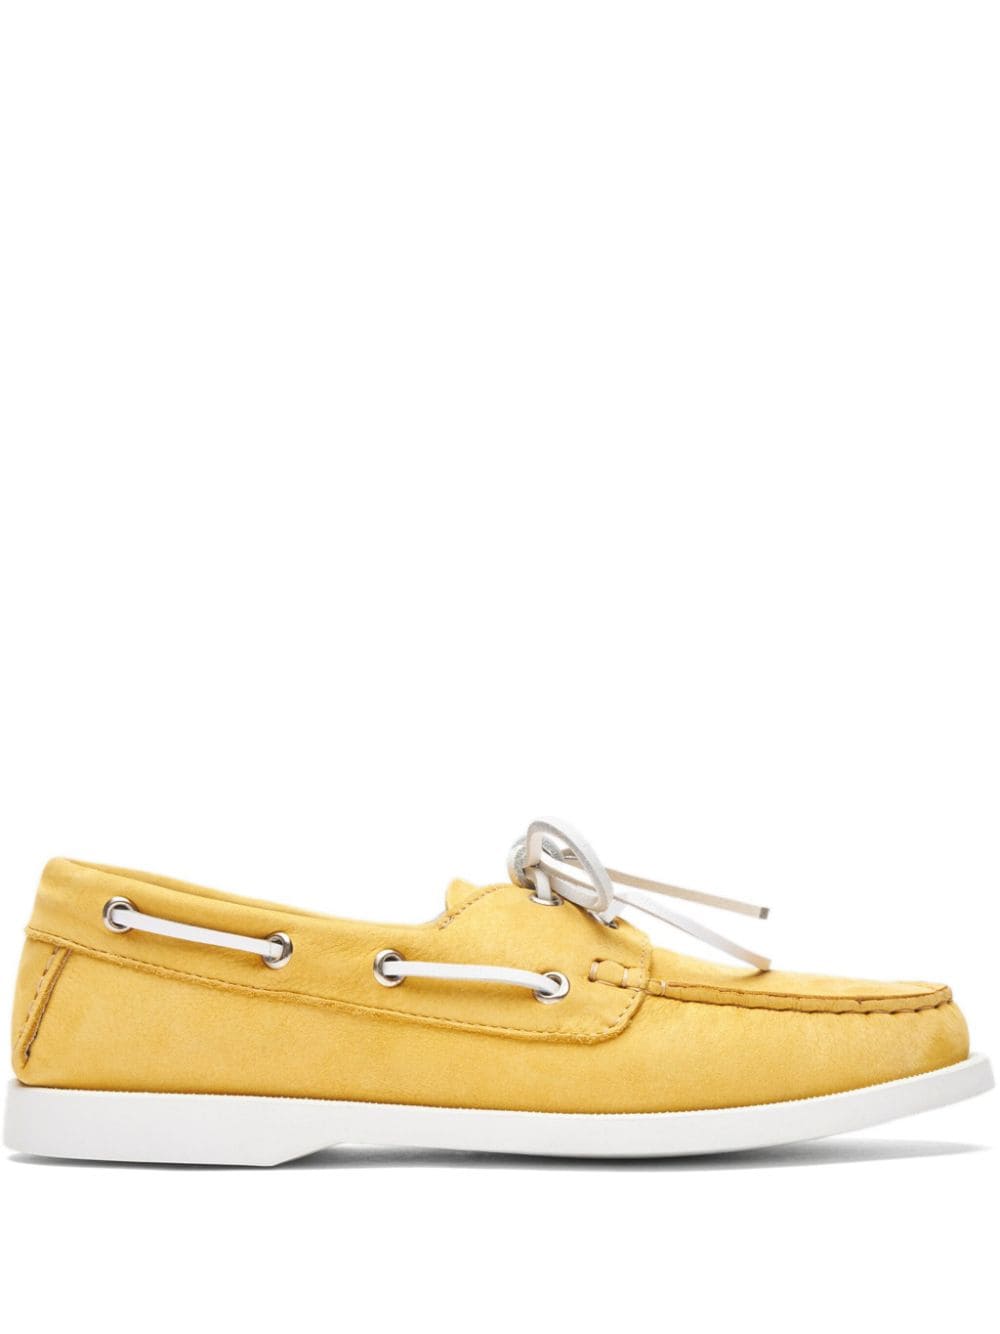 Scarosso Oprah leather boat shoes - Yellow von Scarosso